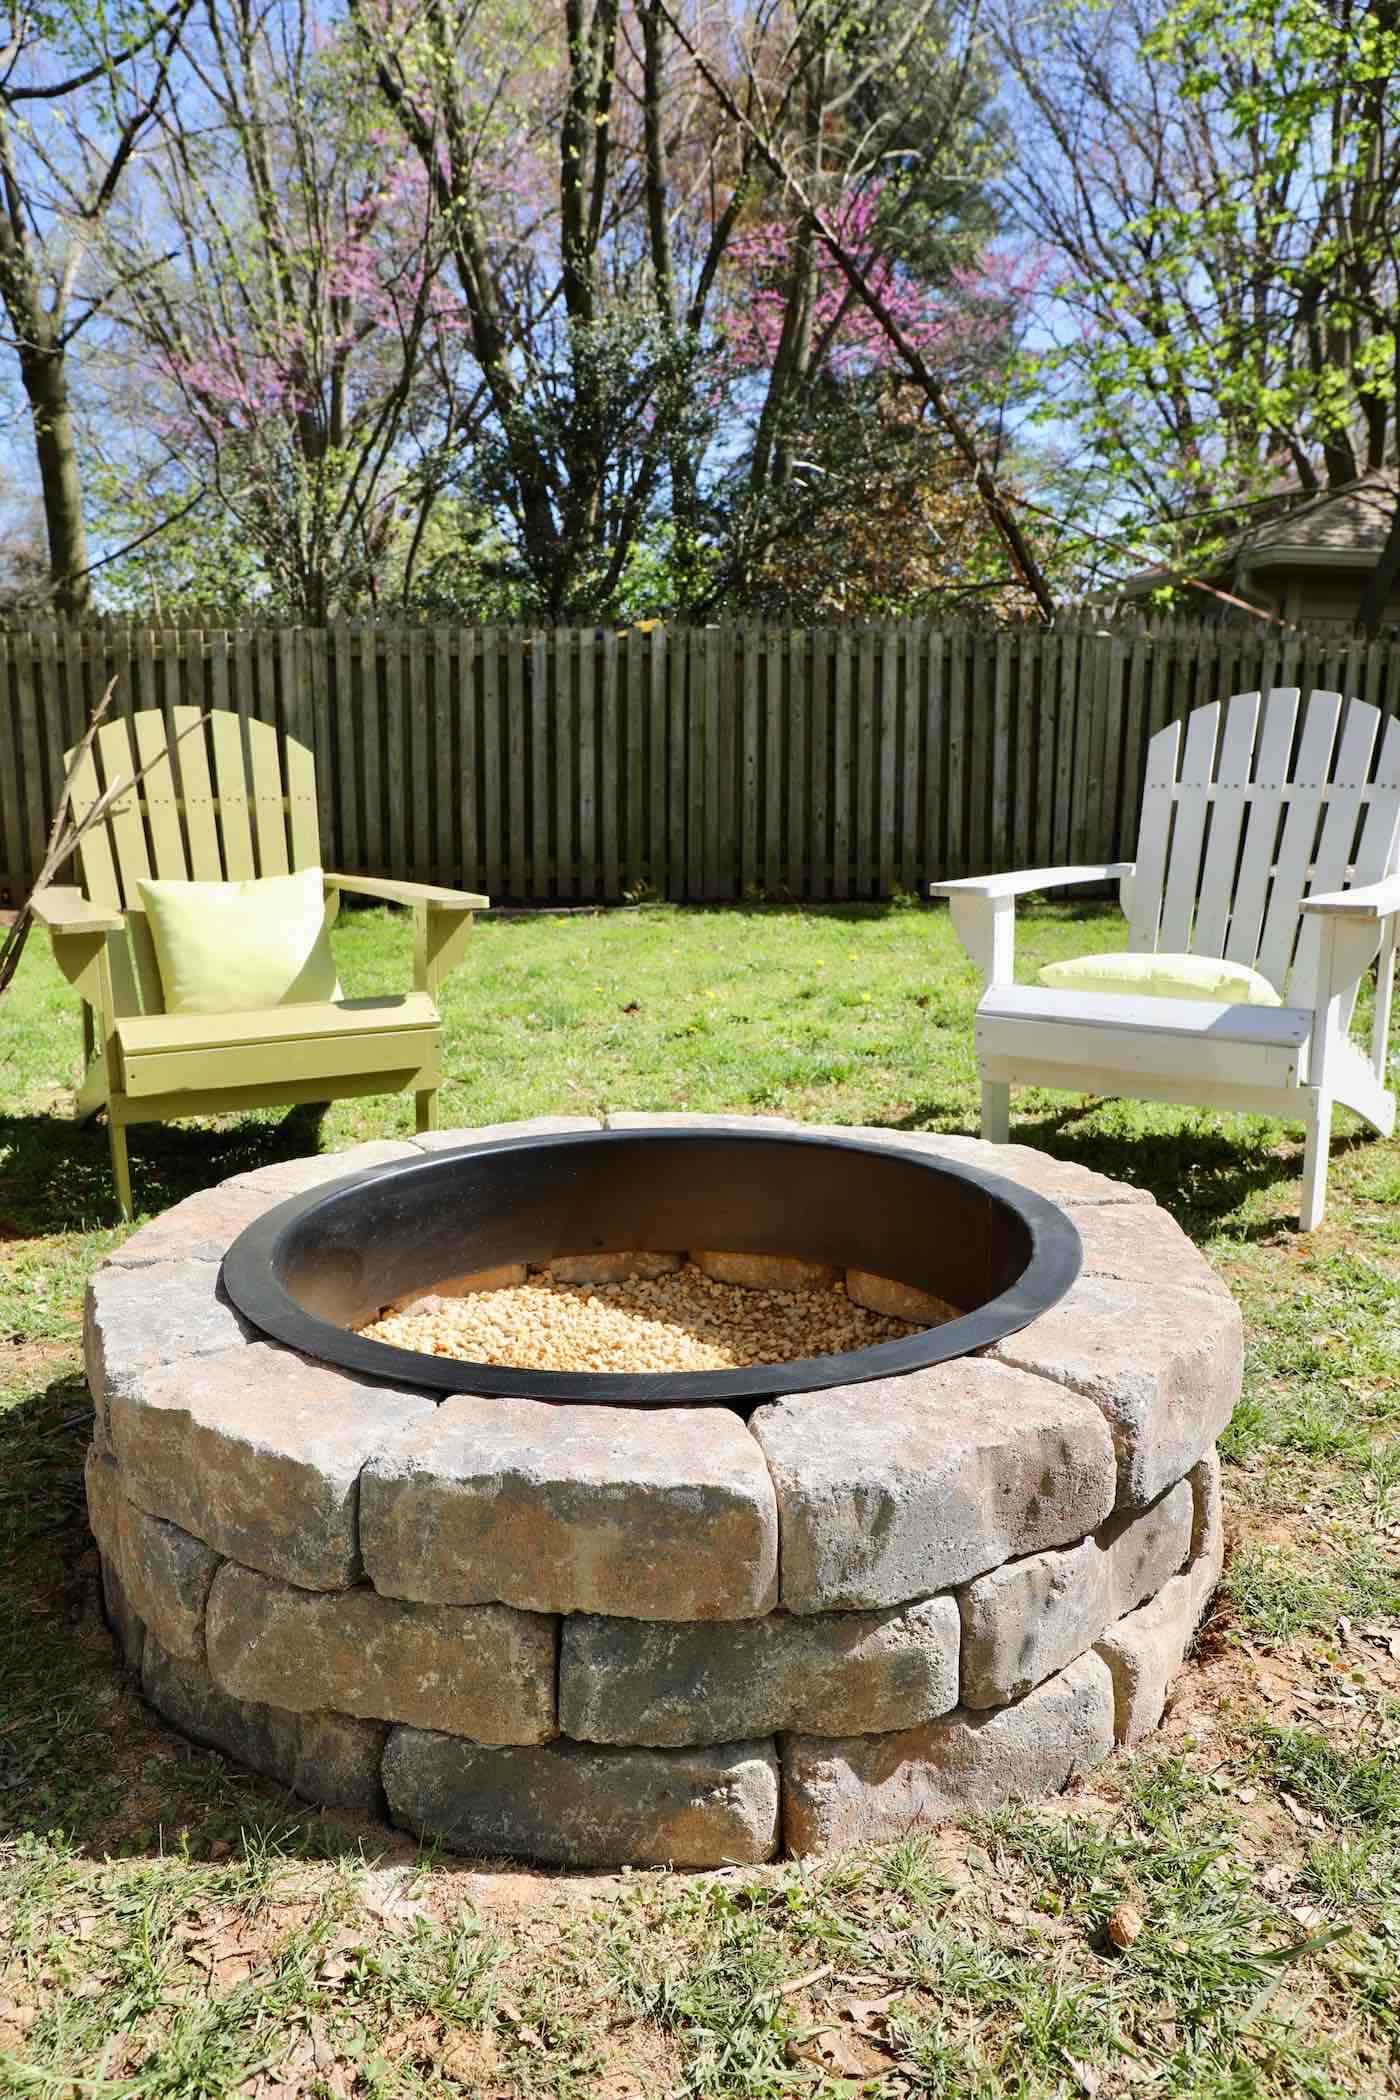 Diy Fire Pit With Gravel Stones, How To Build A Backyard Fire Pit